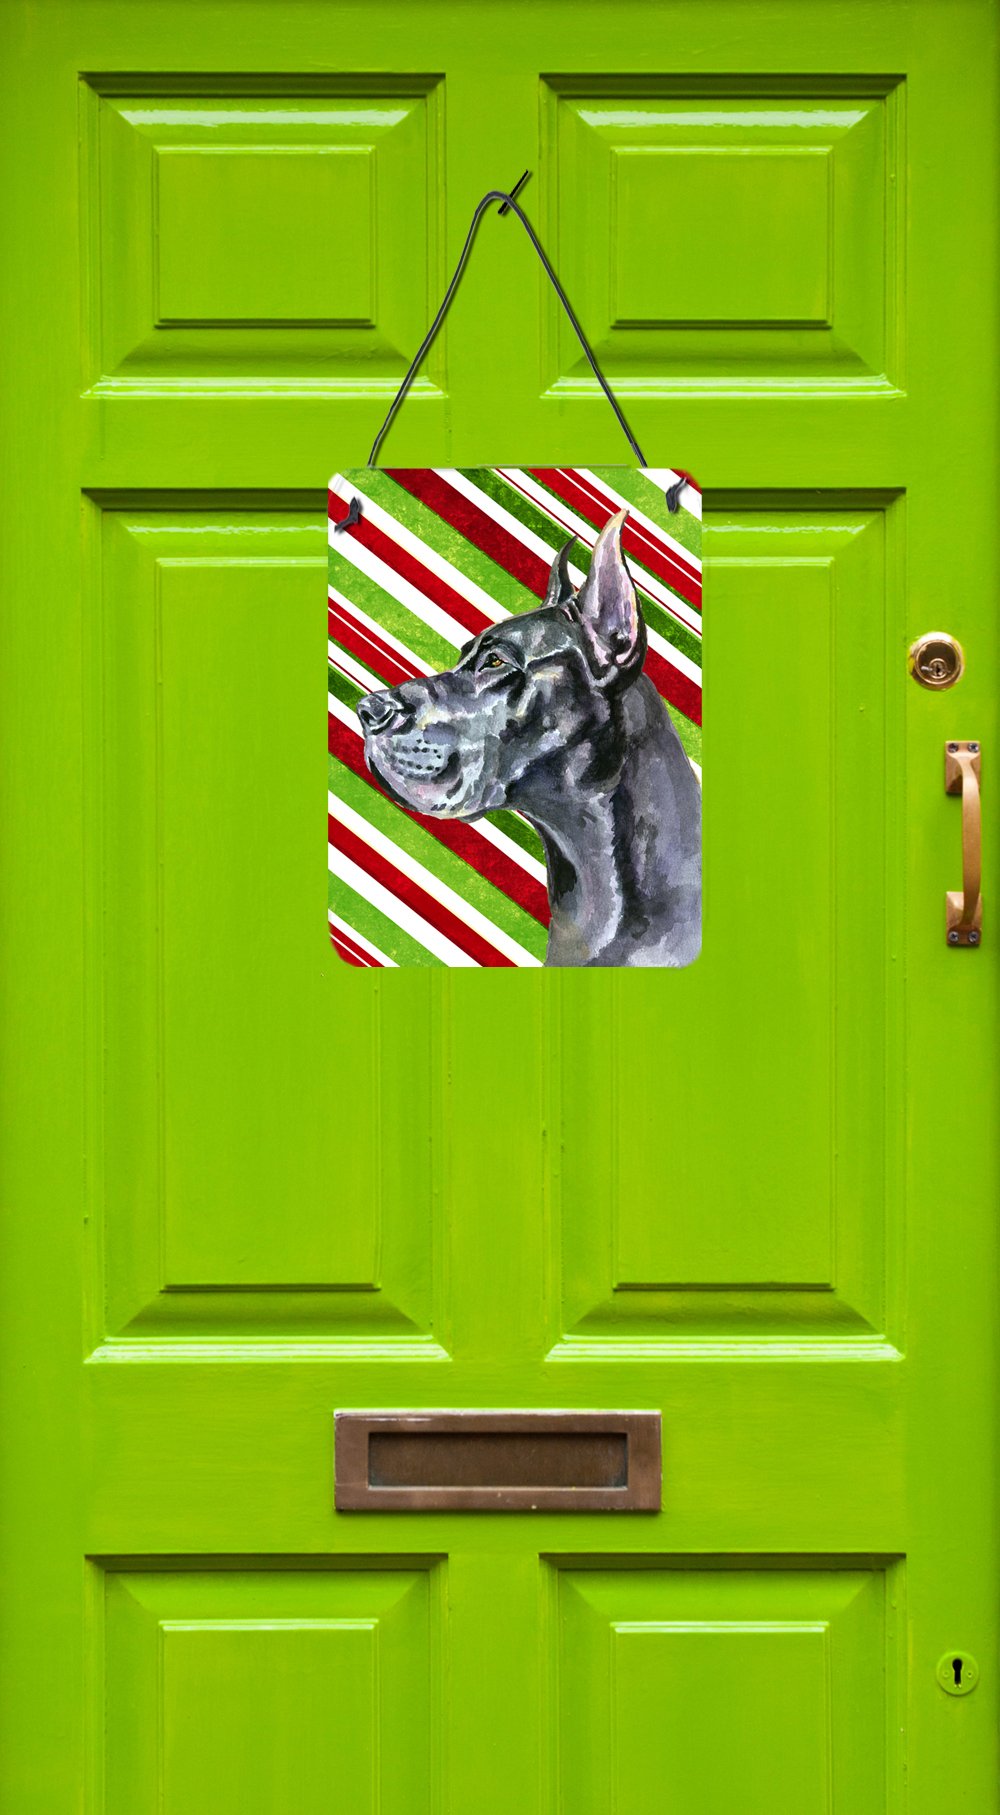 Black Great Dane Candy Cane Holiday Christmas Wall or Door Hanging Prints LH9592DS1216 by Caroline's Treasures